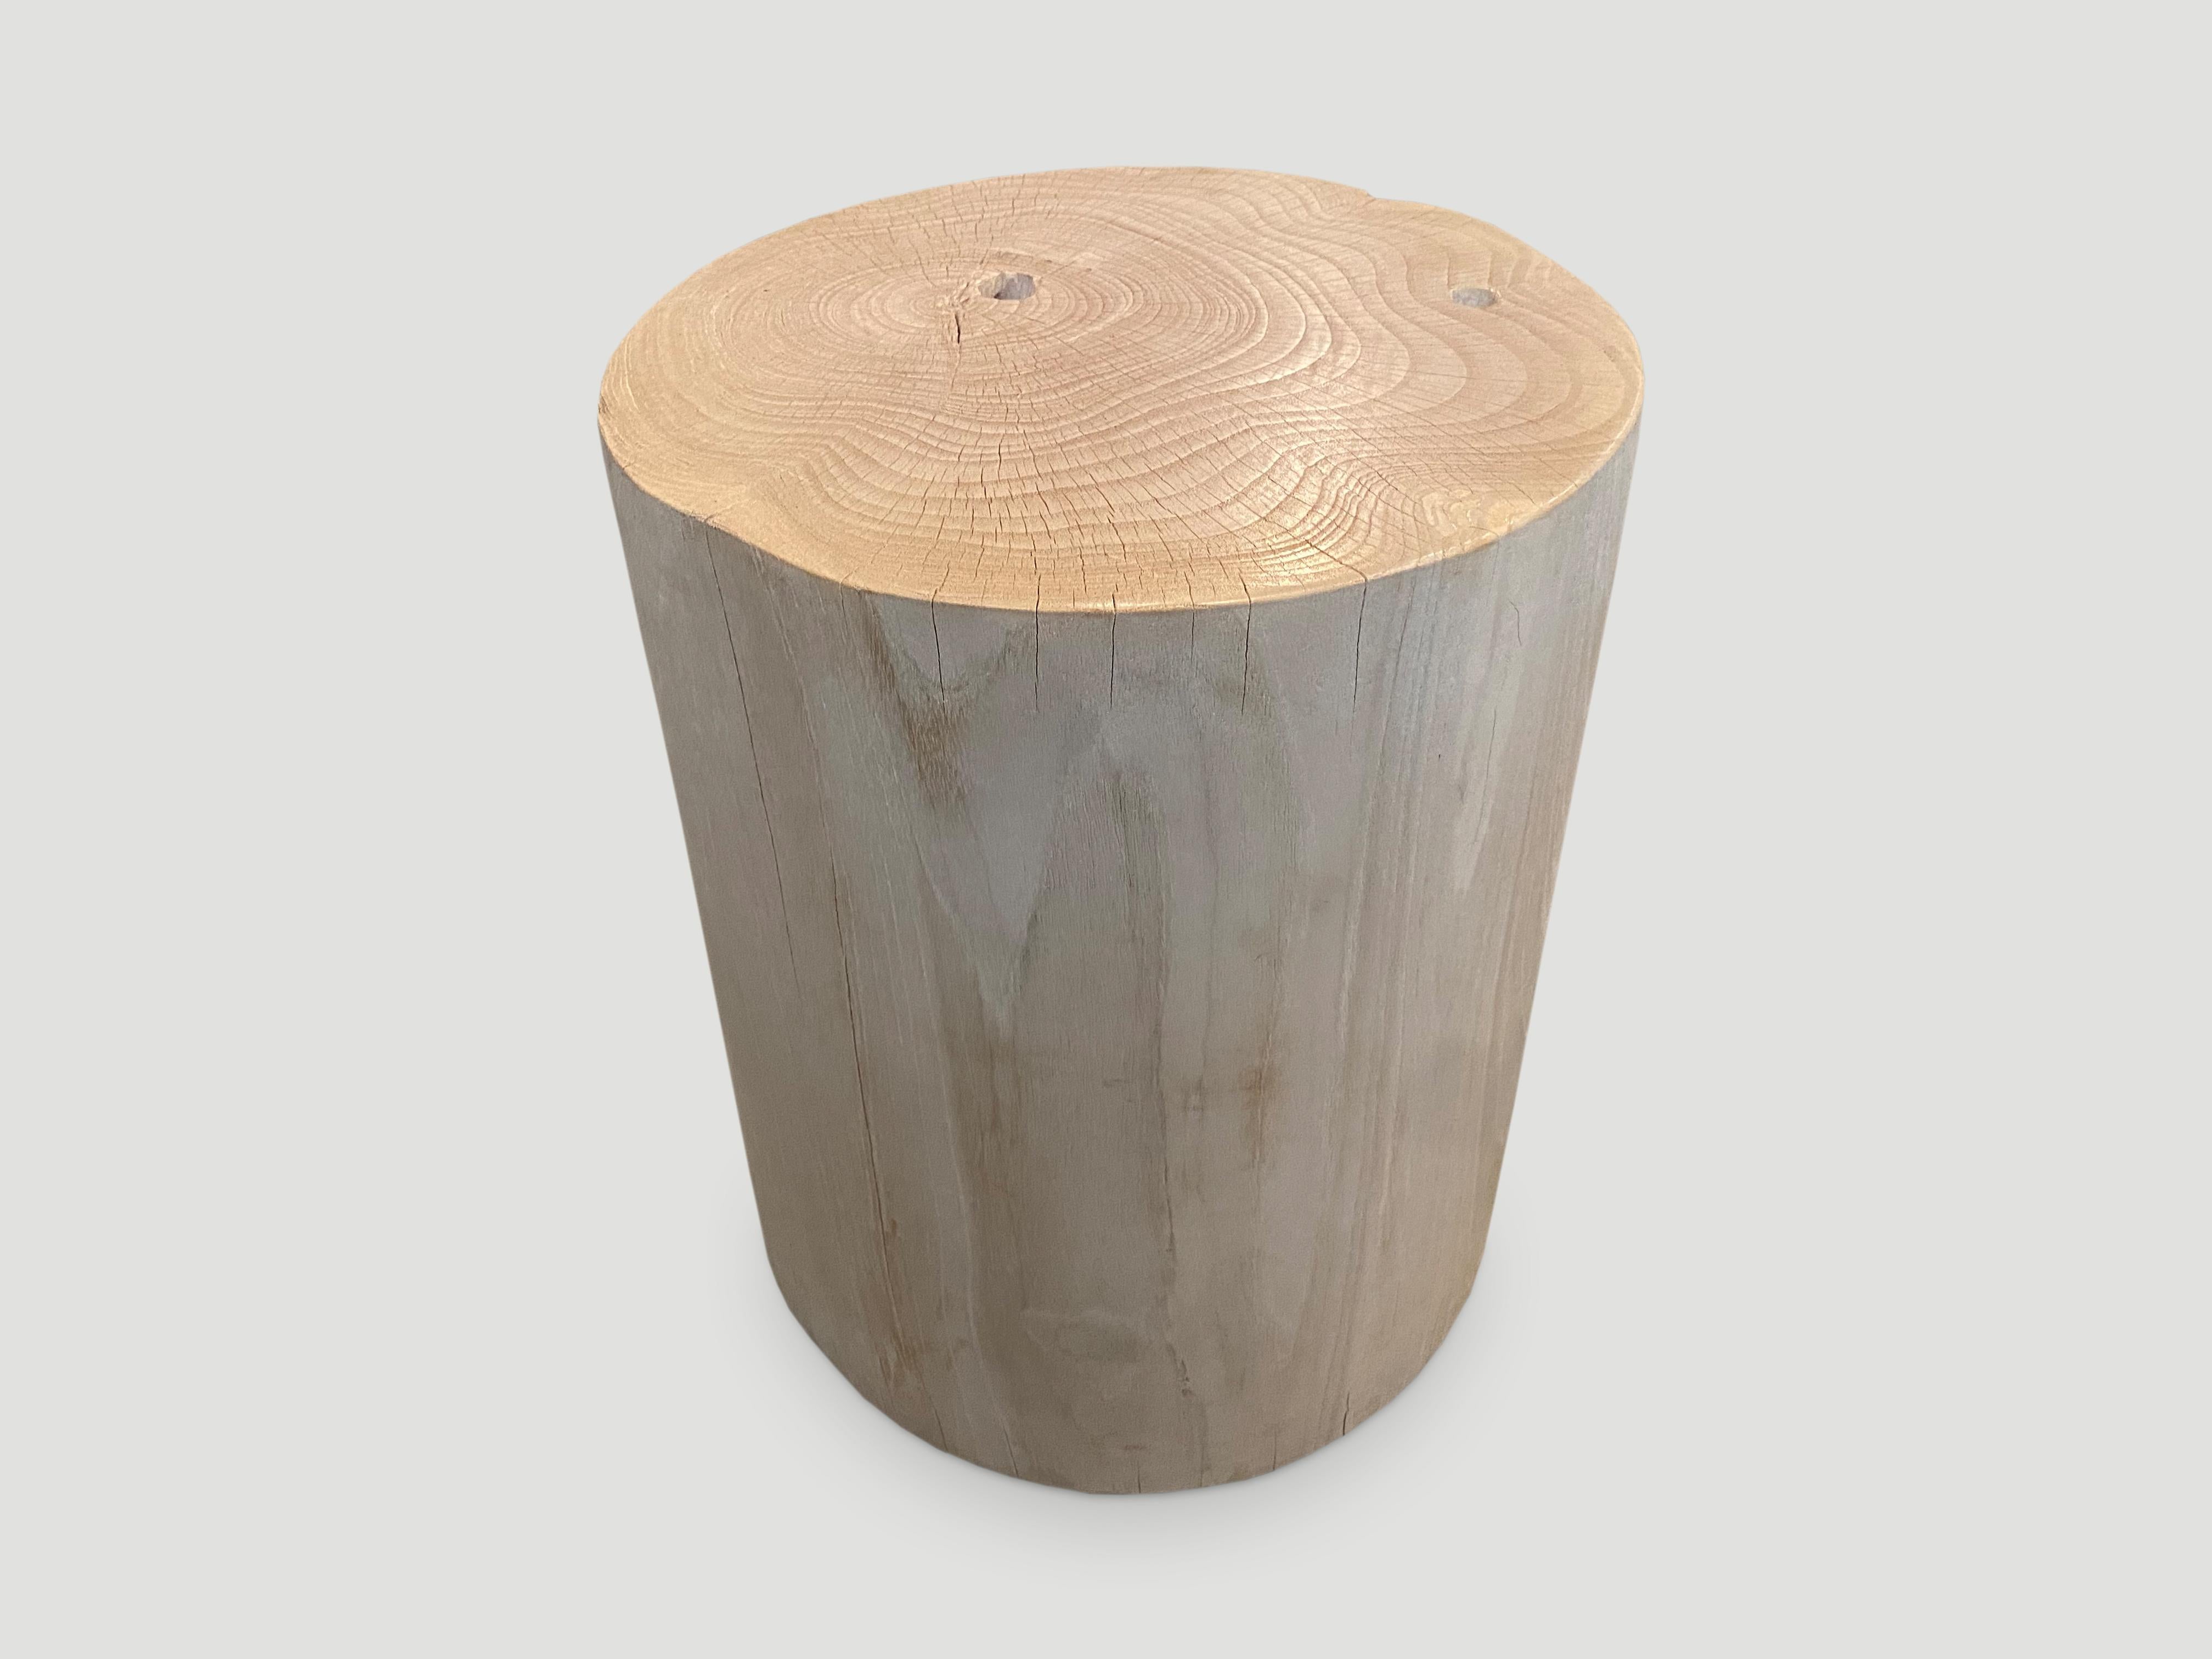 Reclaimed teak wood cylinder side table or stool. Bleached and carved into a minimalist cylinder whilst respecting the natural organic wood. Also available charred. We have a collection.

The St. Barts Collection features an exciting new line of